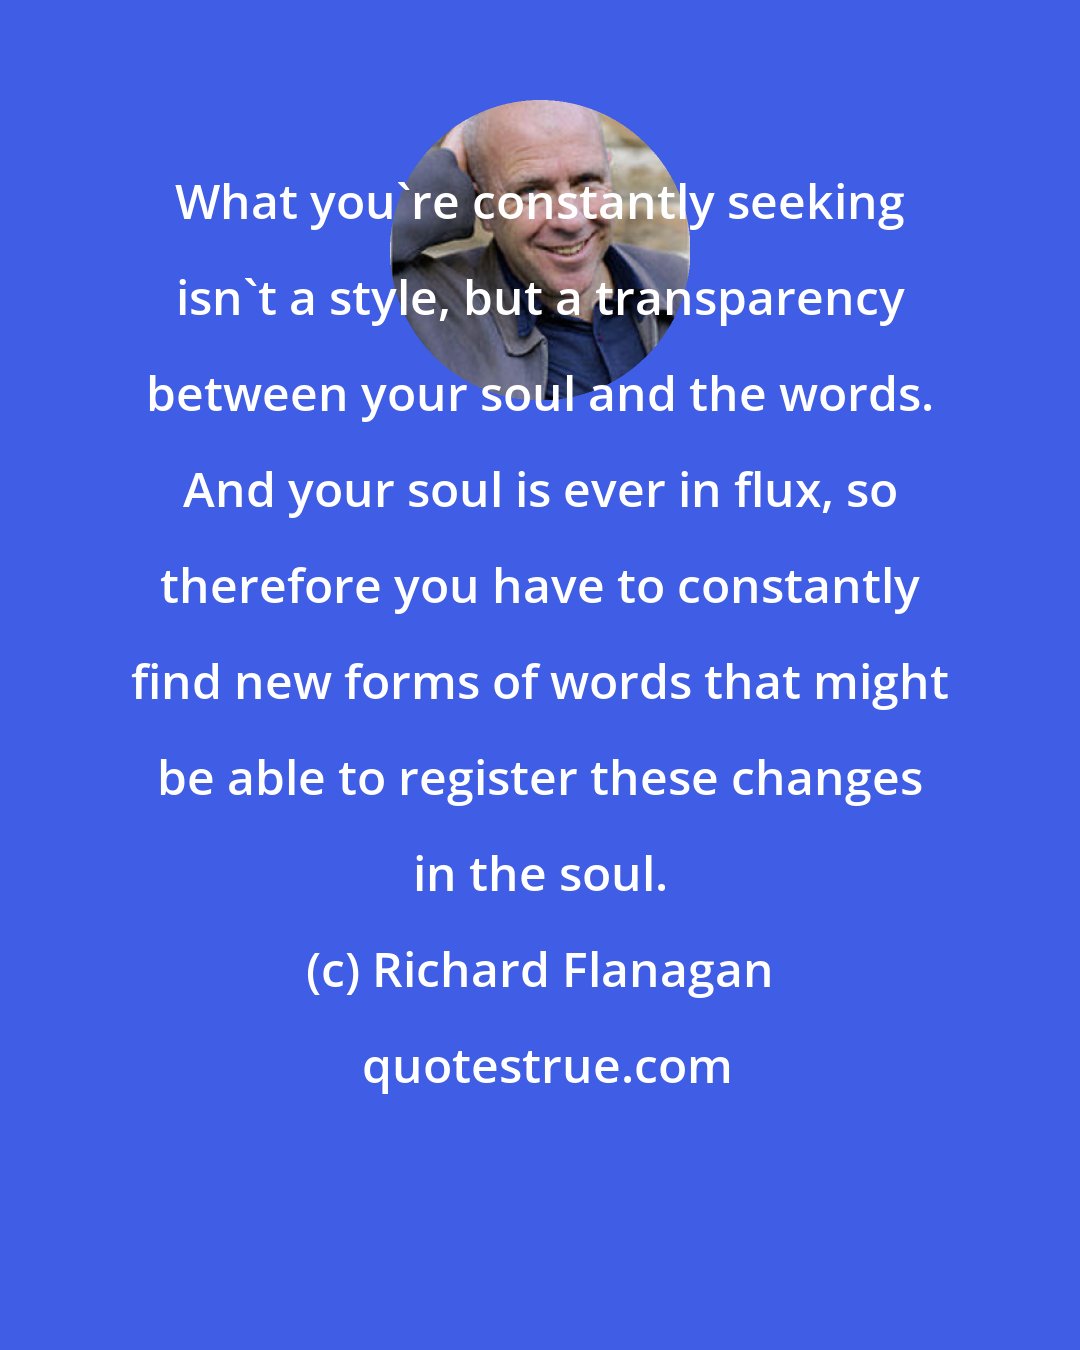 Richard Flanagan: What you're constantly seeking isn't a style, but a transparency between your soul and the words. And your soul is ever in flux, so therefore you have to constantly find new forms of words that might be able to register these changes in the soul.